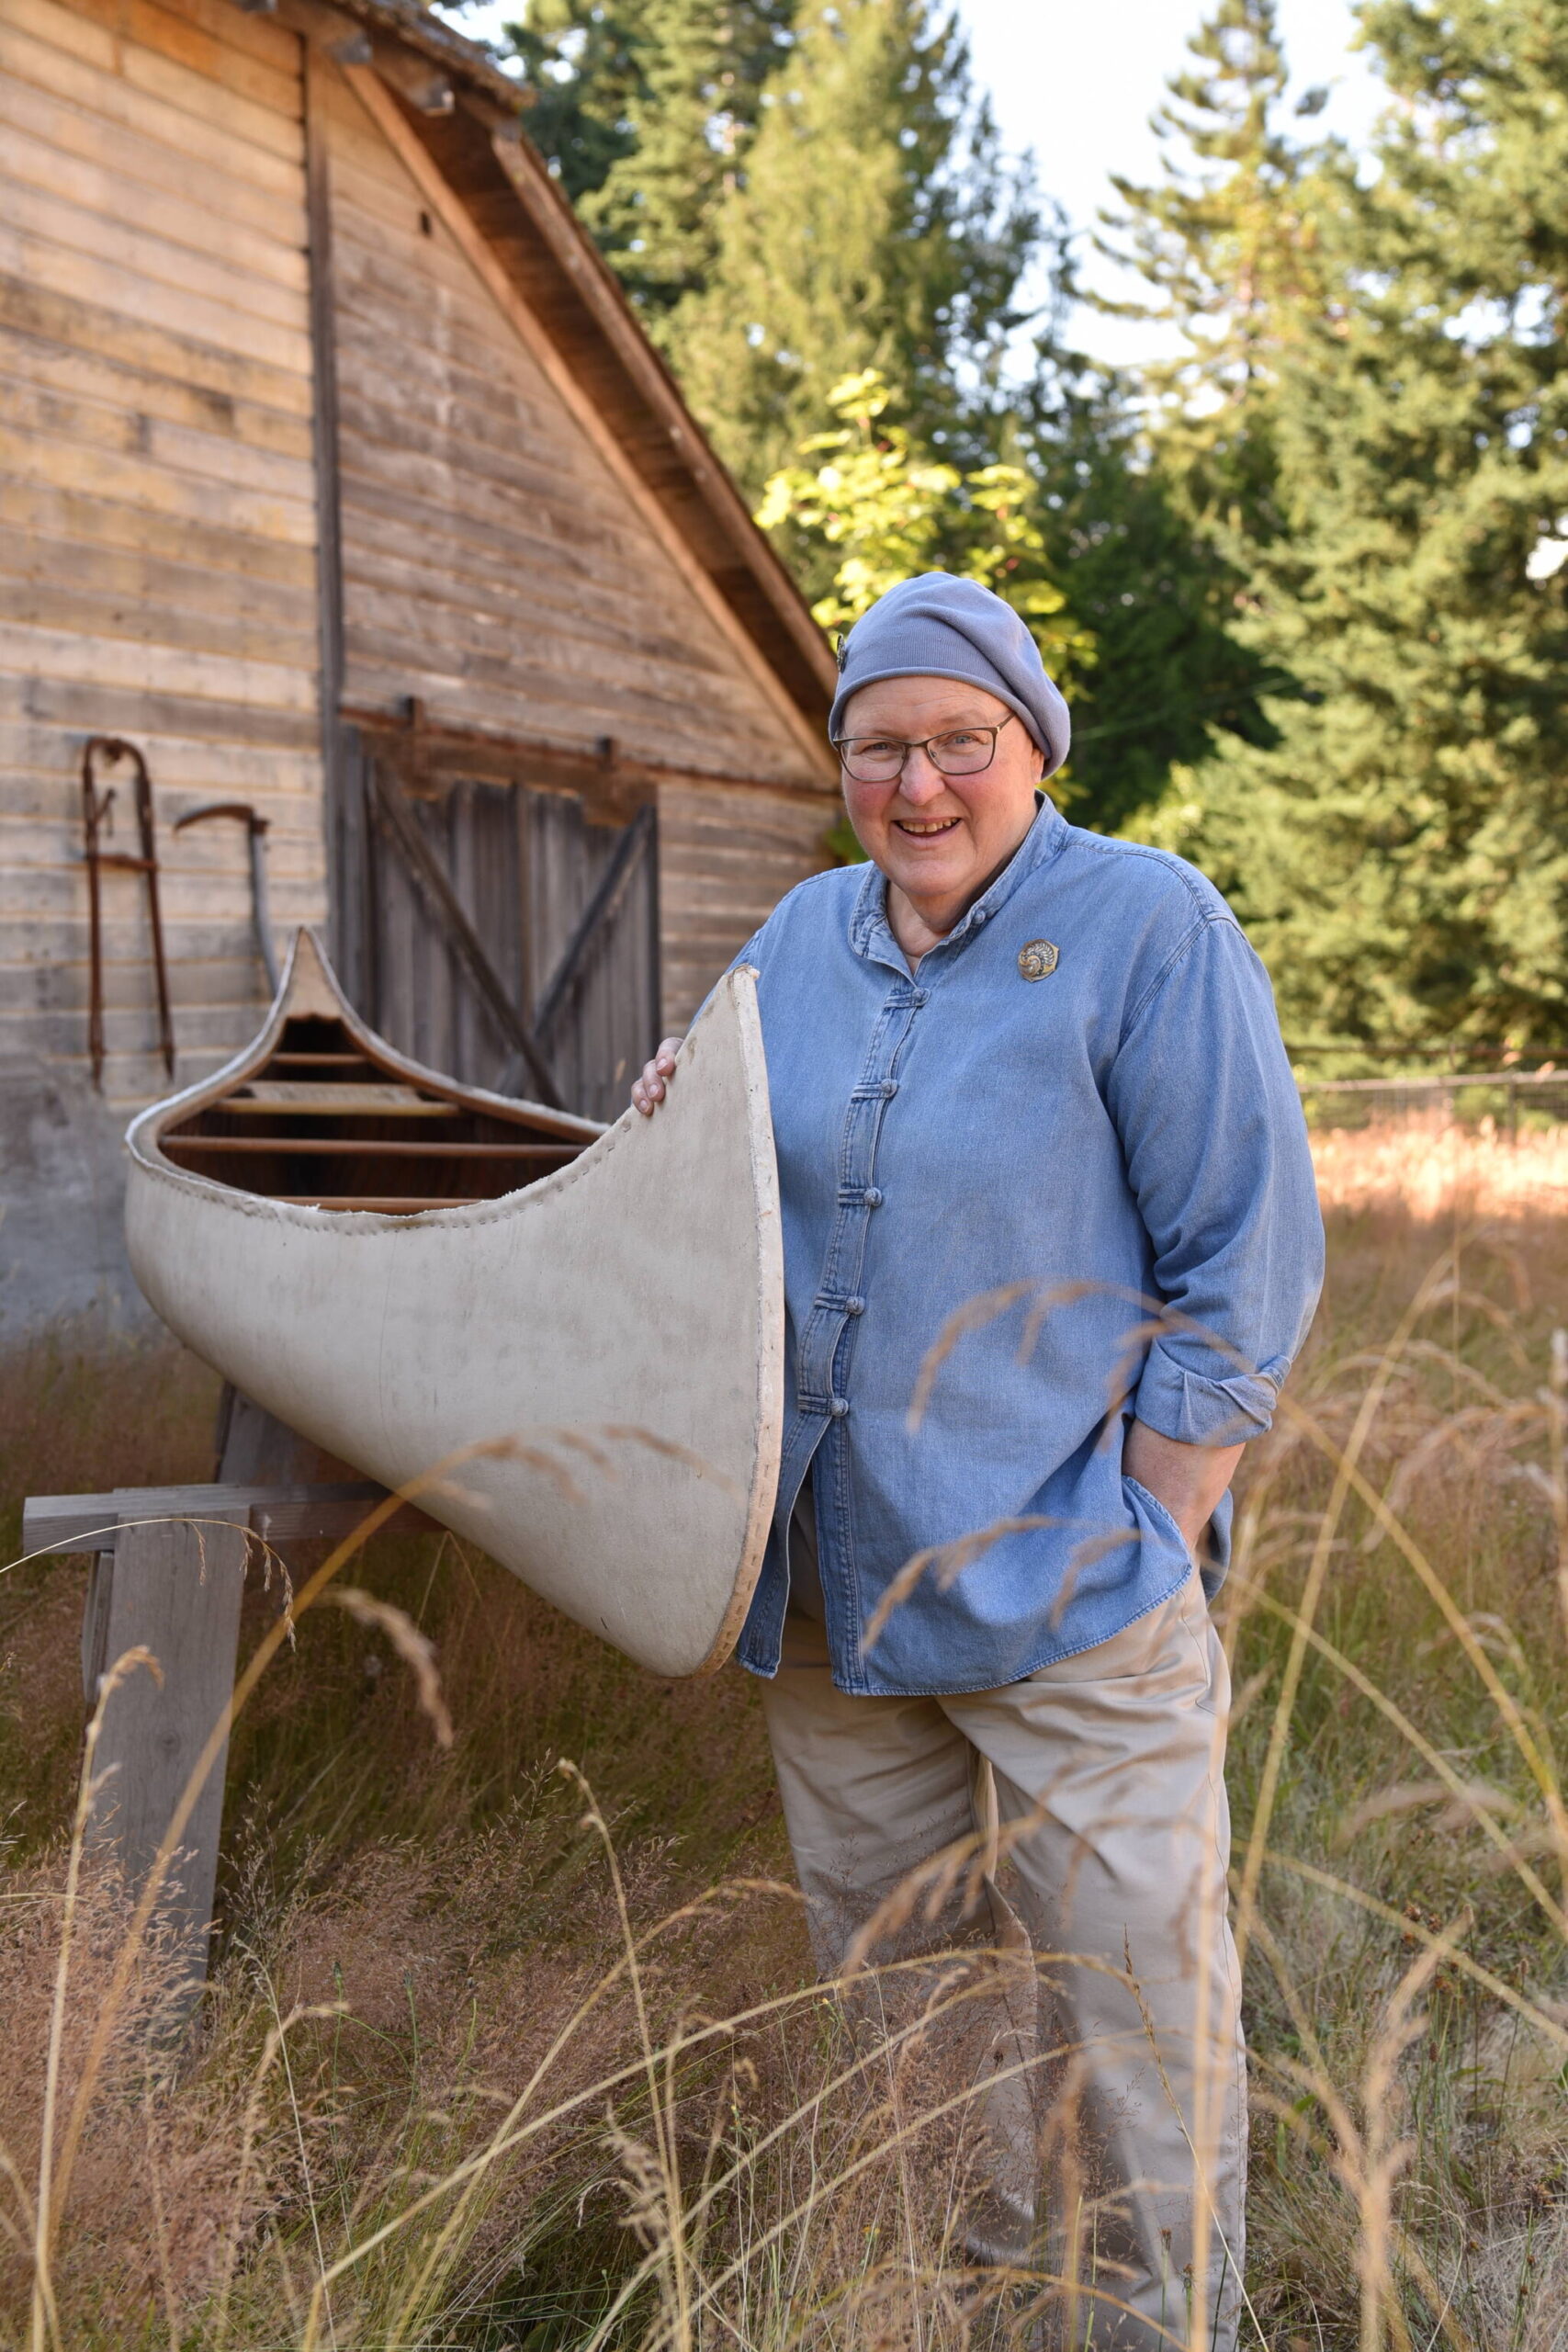 Susan Goodwin poses with a 100-year-old canoe she purchased from the Vick family 40 years ago.